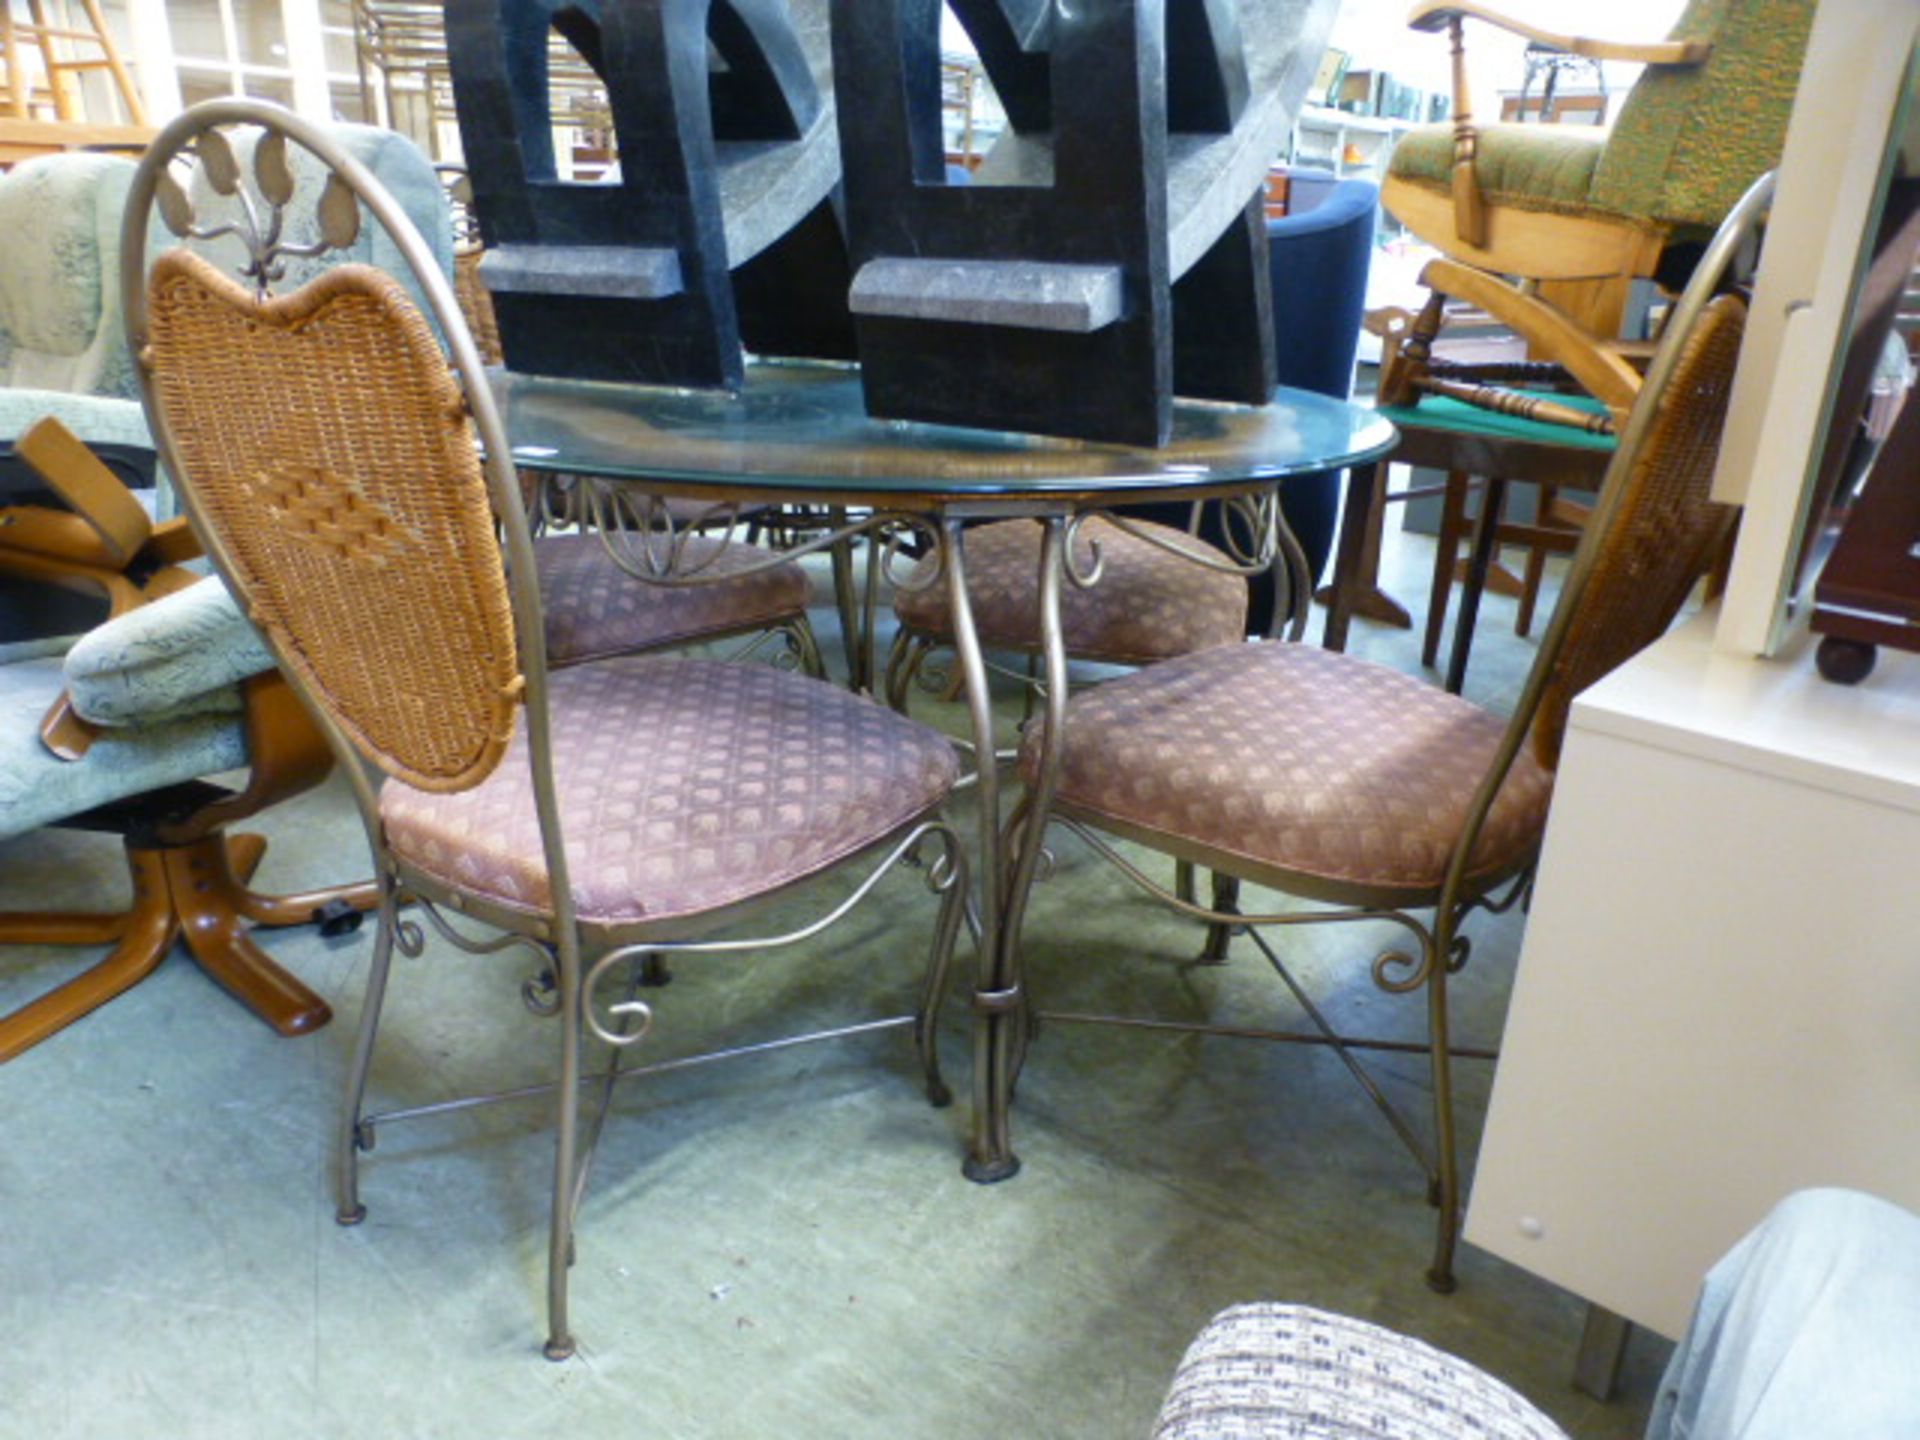 A modern circular metalwork based conservatory table with a set of four matching chairs